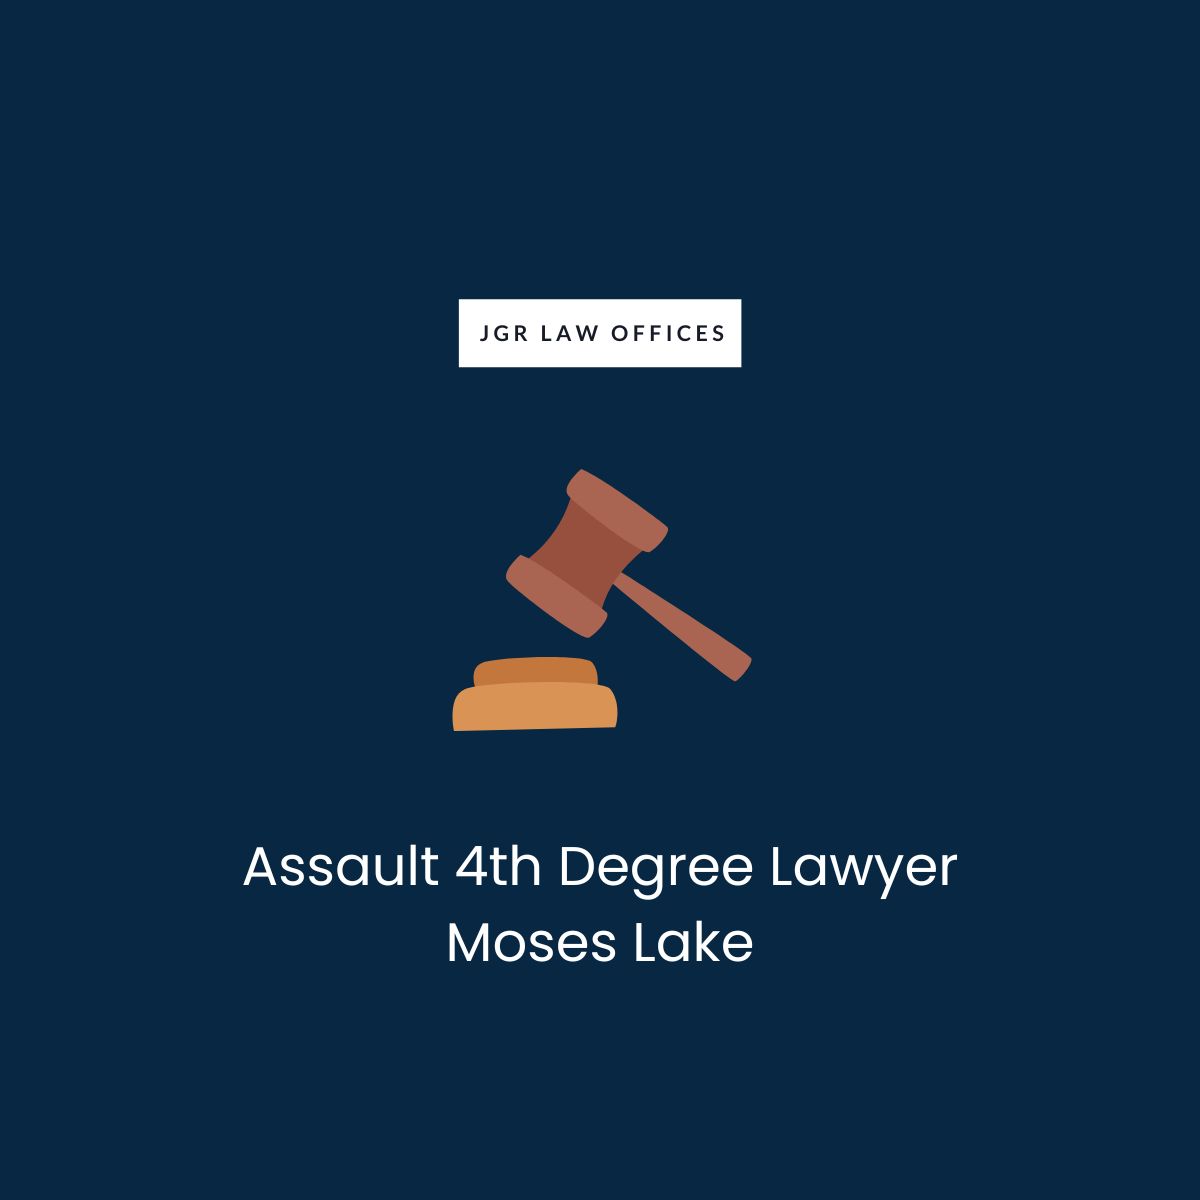 Assault 4th Degree Lawyer Moses Lake Assault 4th Degree